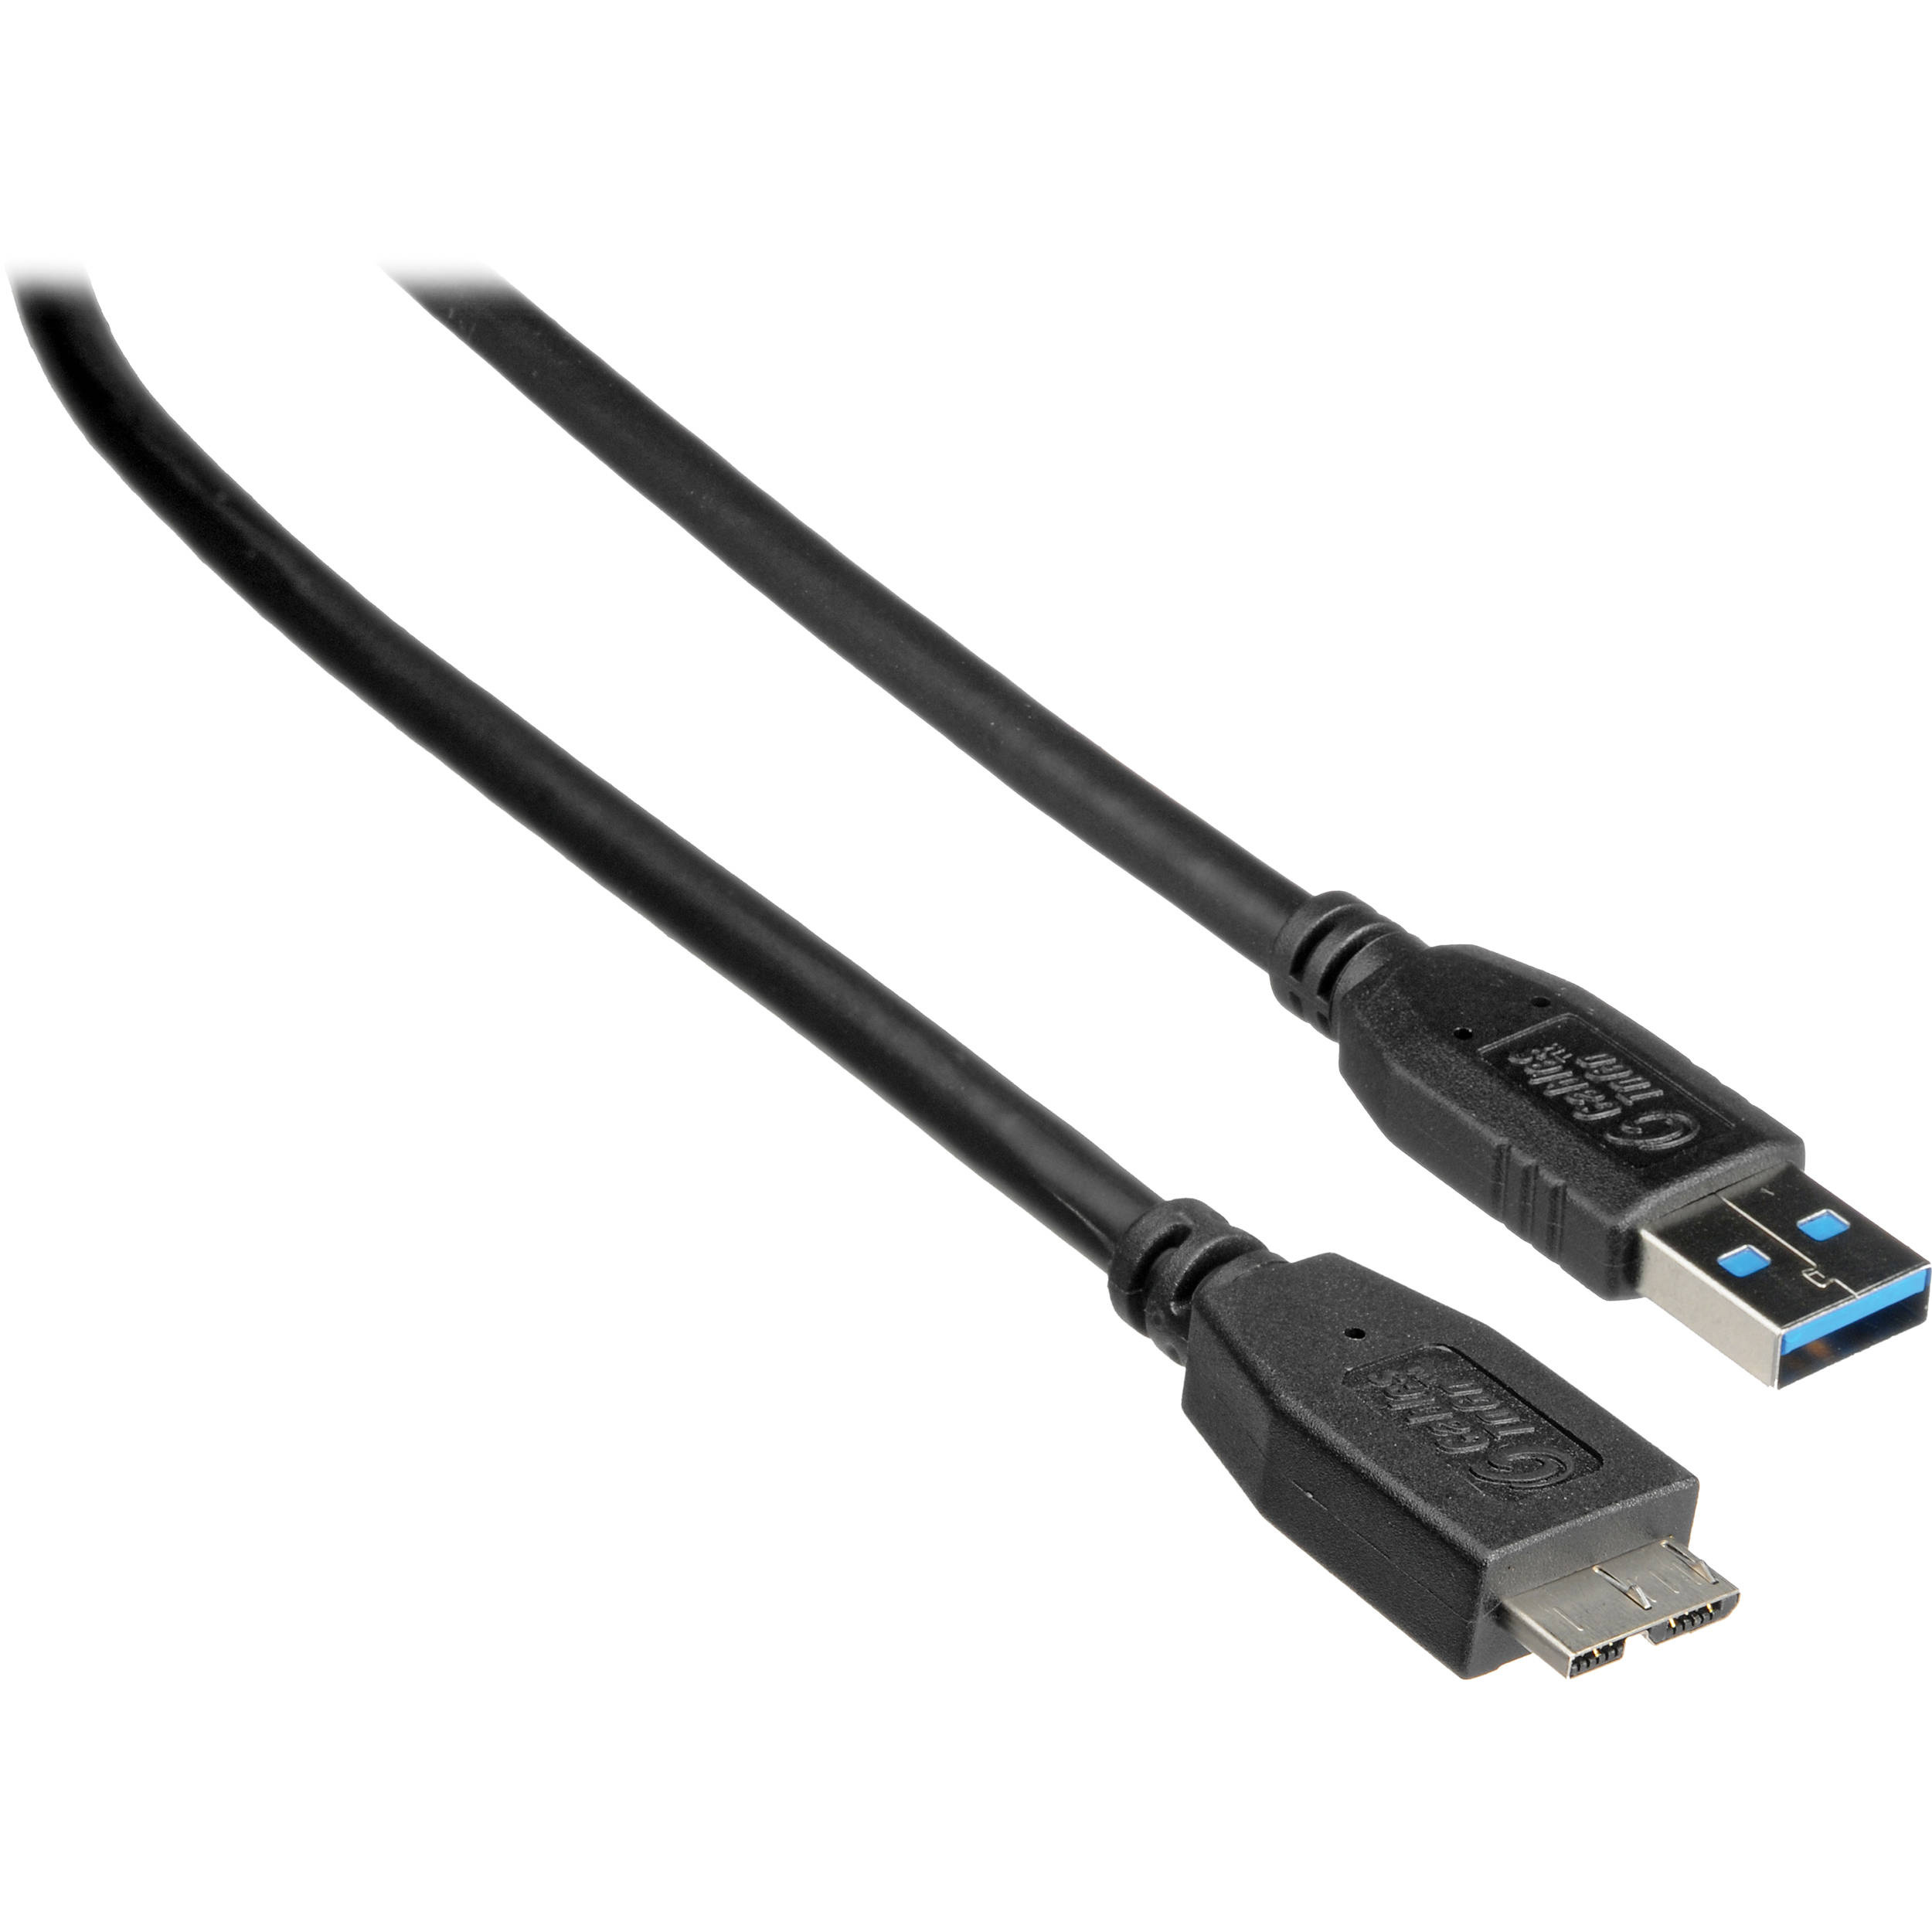 C2G 6.5' (2 m) USB 3.0 A Male to Micro B Male Cable (Black)